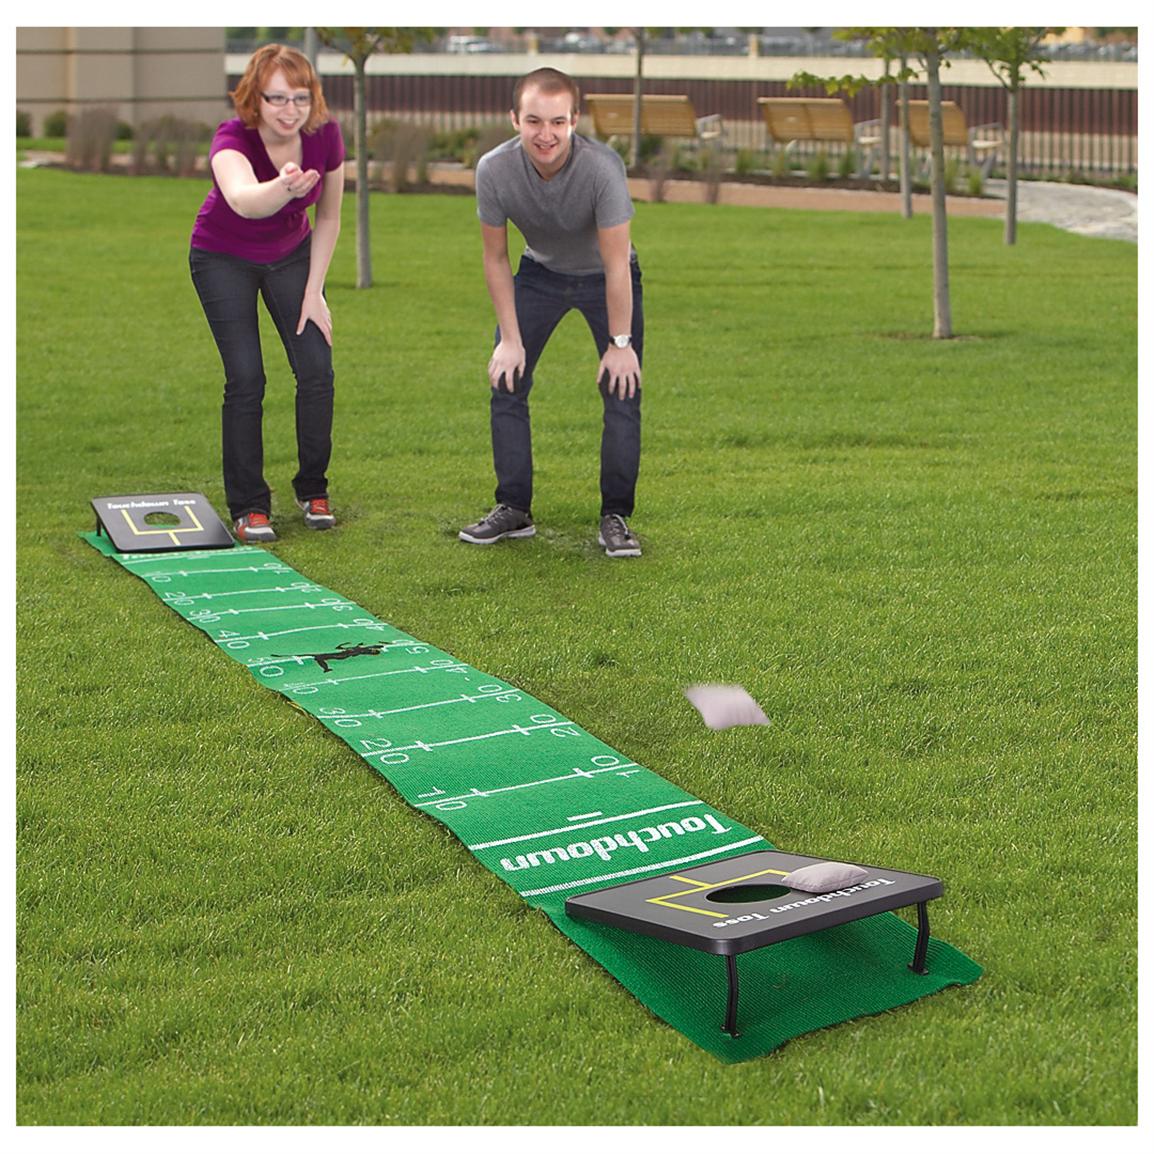 2 - in - 1 Bean Bag Toss Game - 281891, at Sportsman's Guide